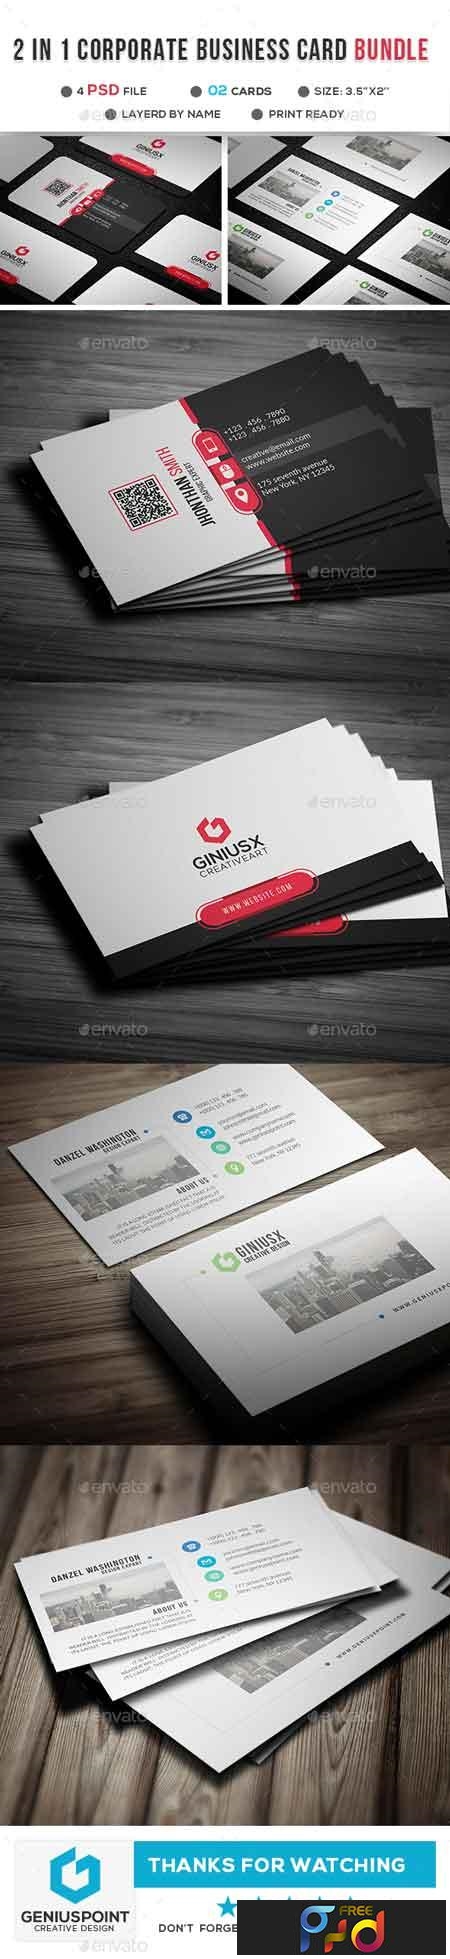 in 1 Business Card Bundle